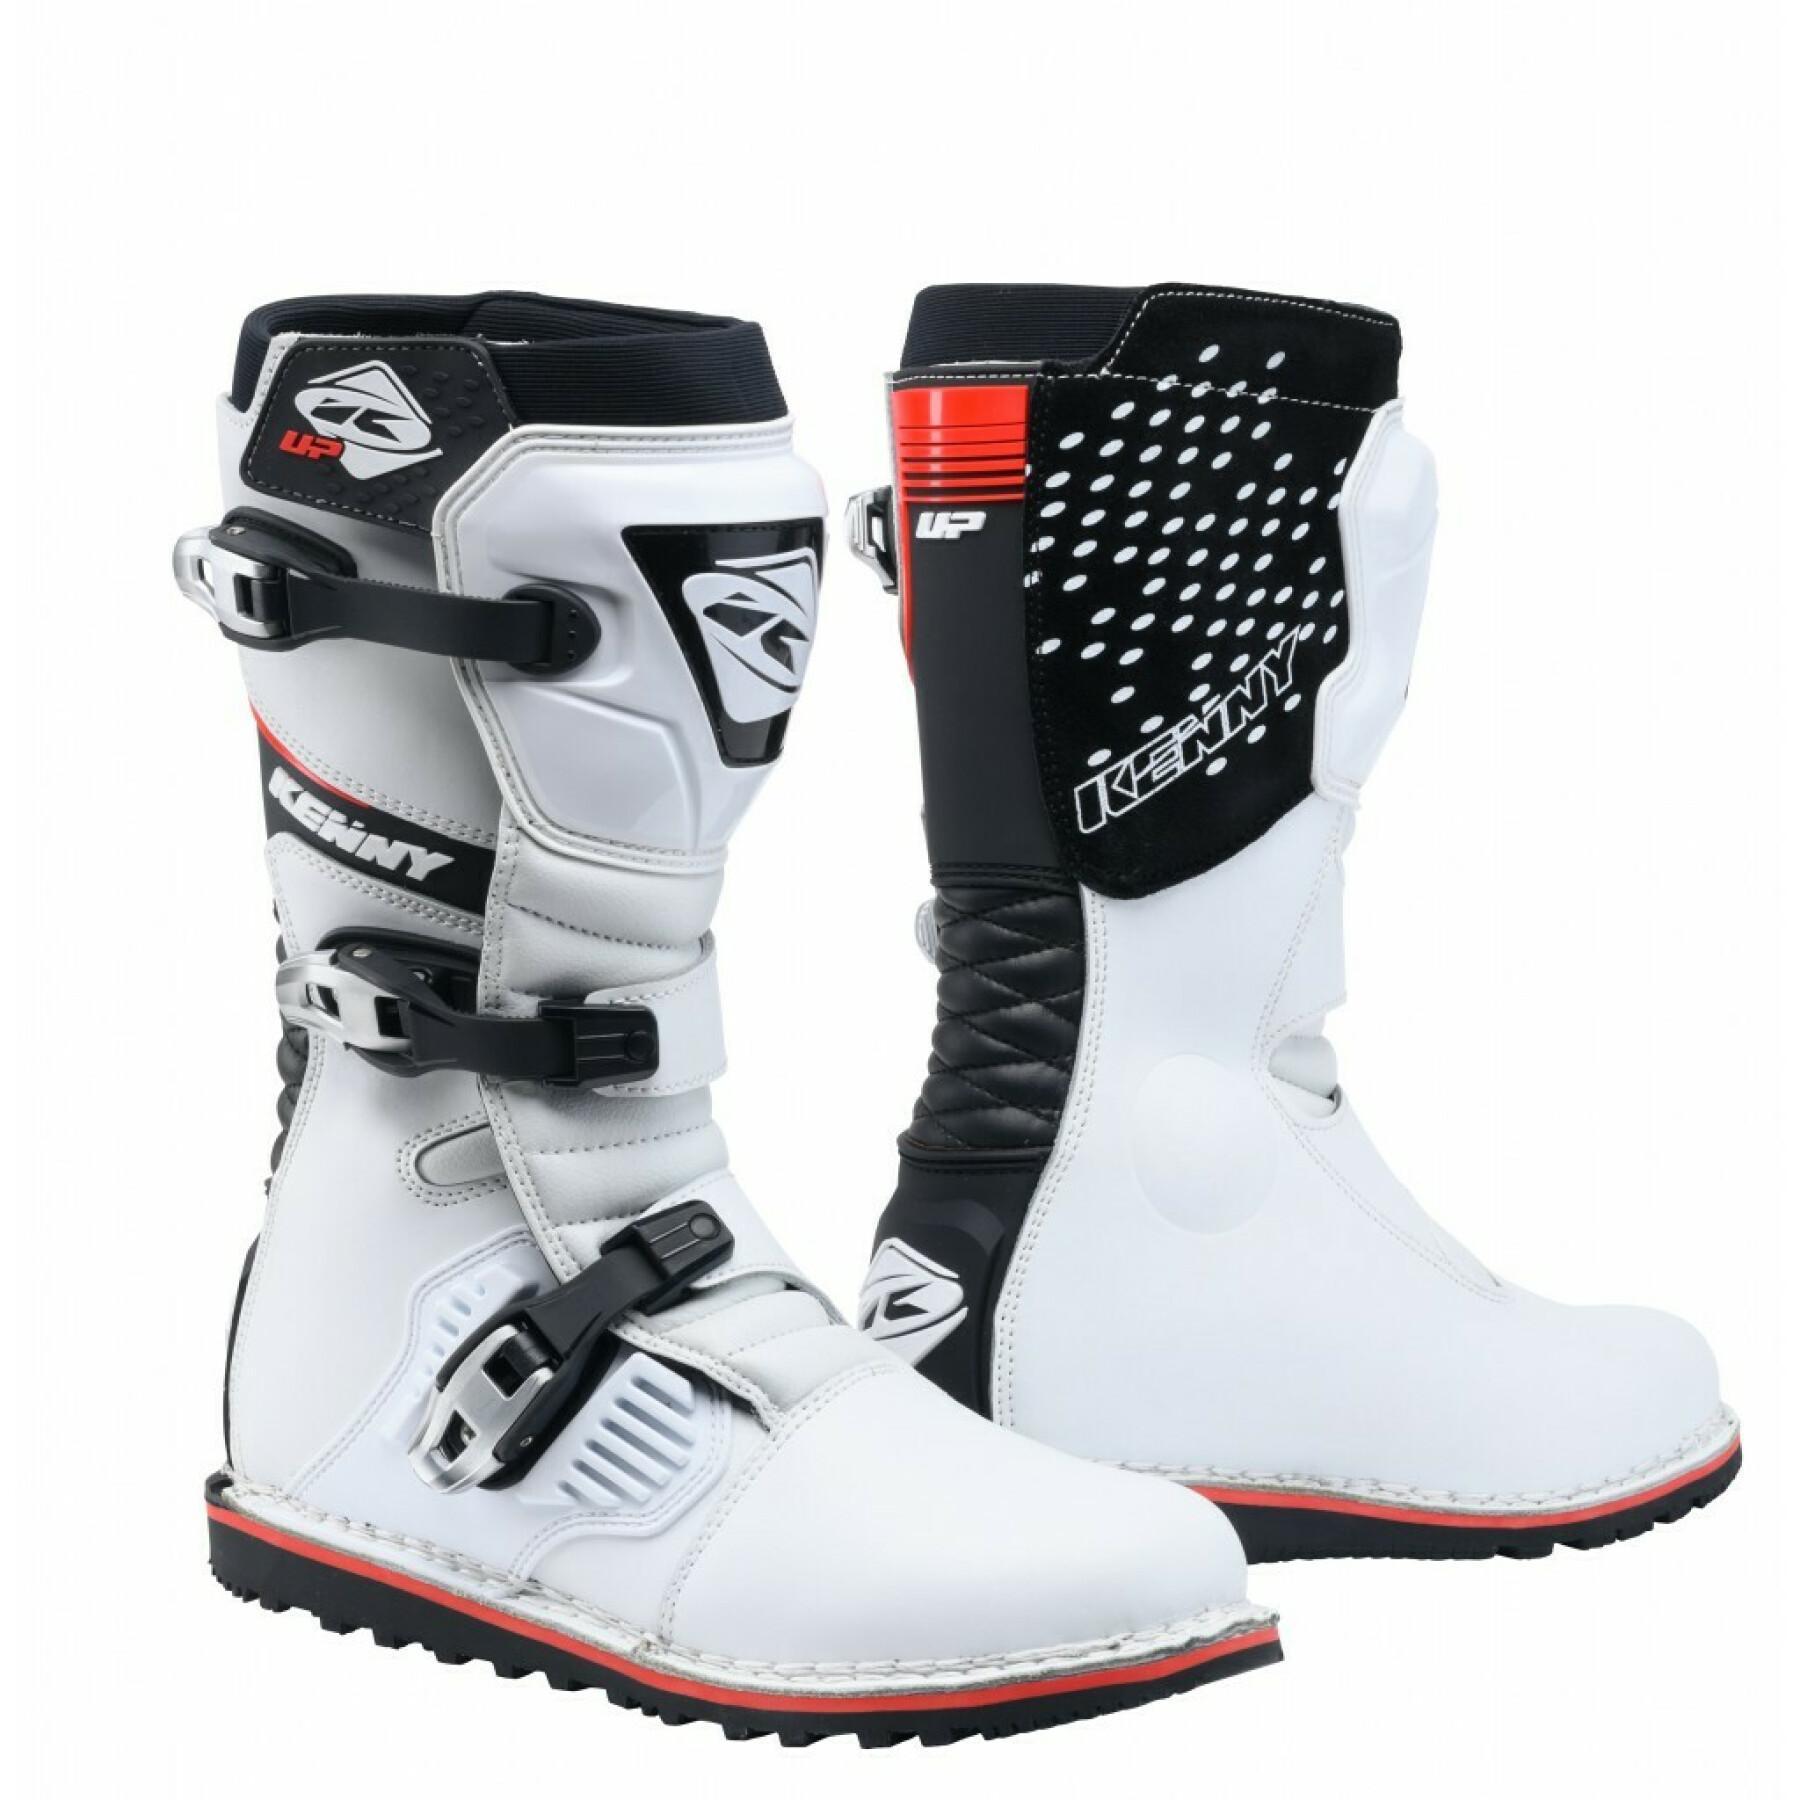 Motocross boots Kenny trial up